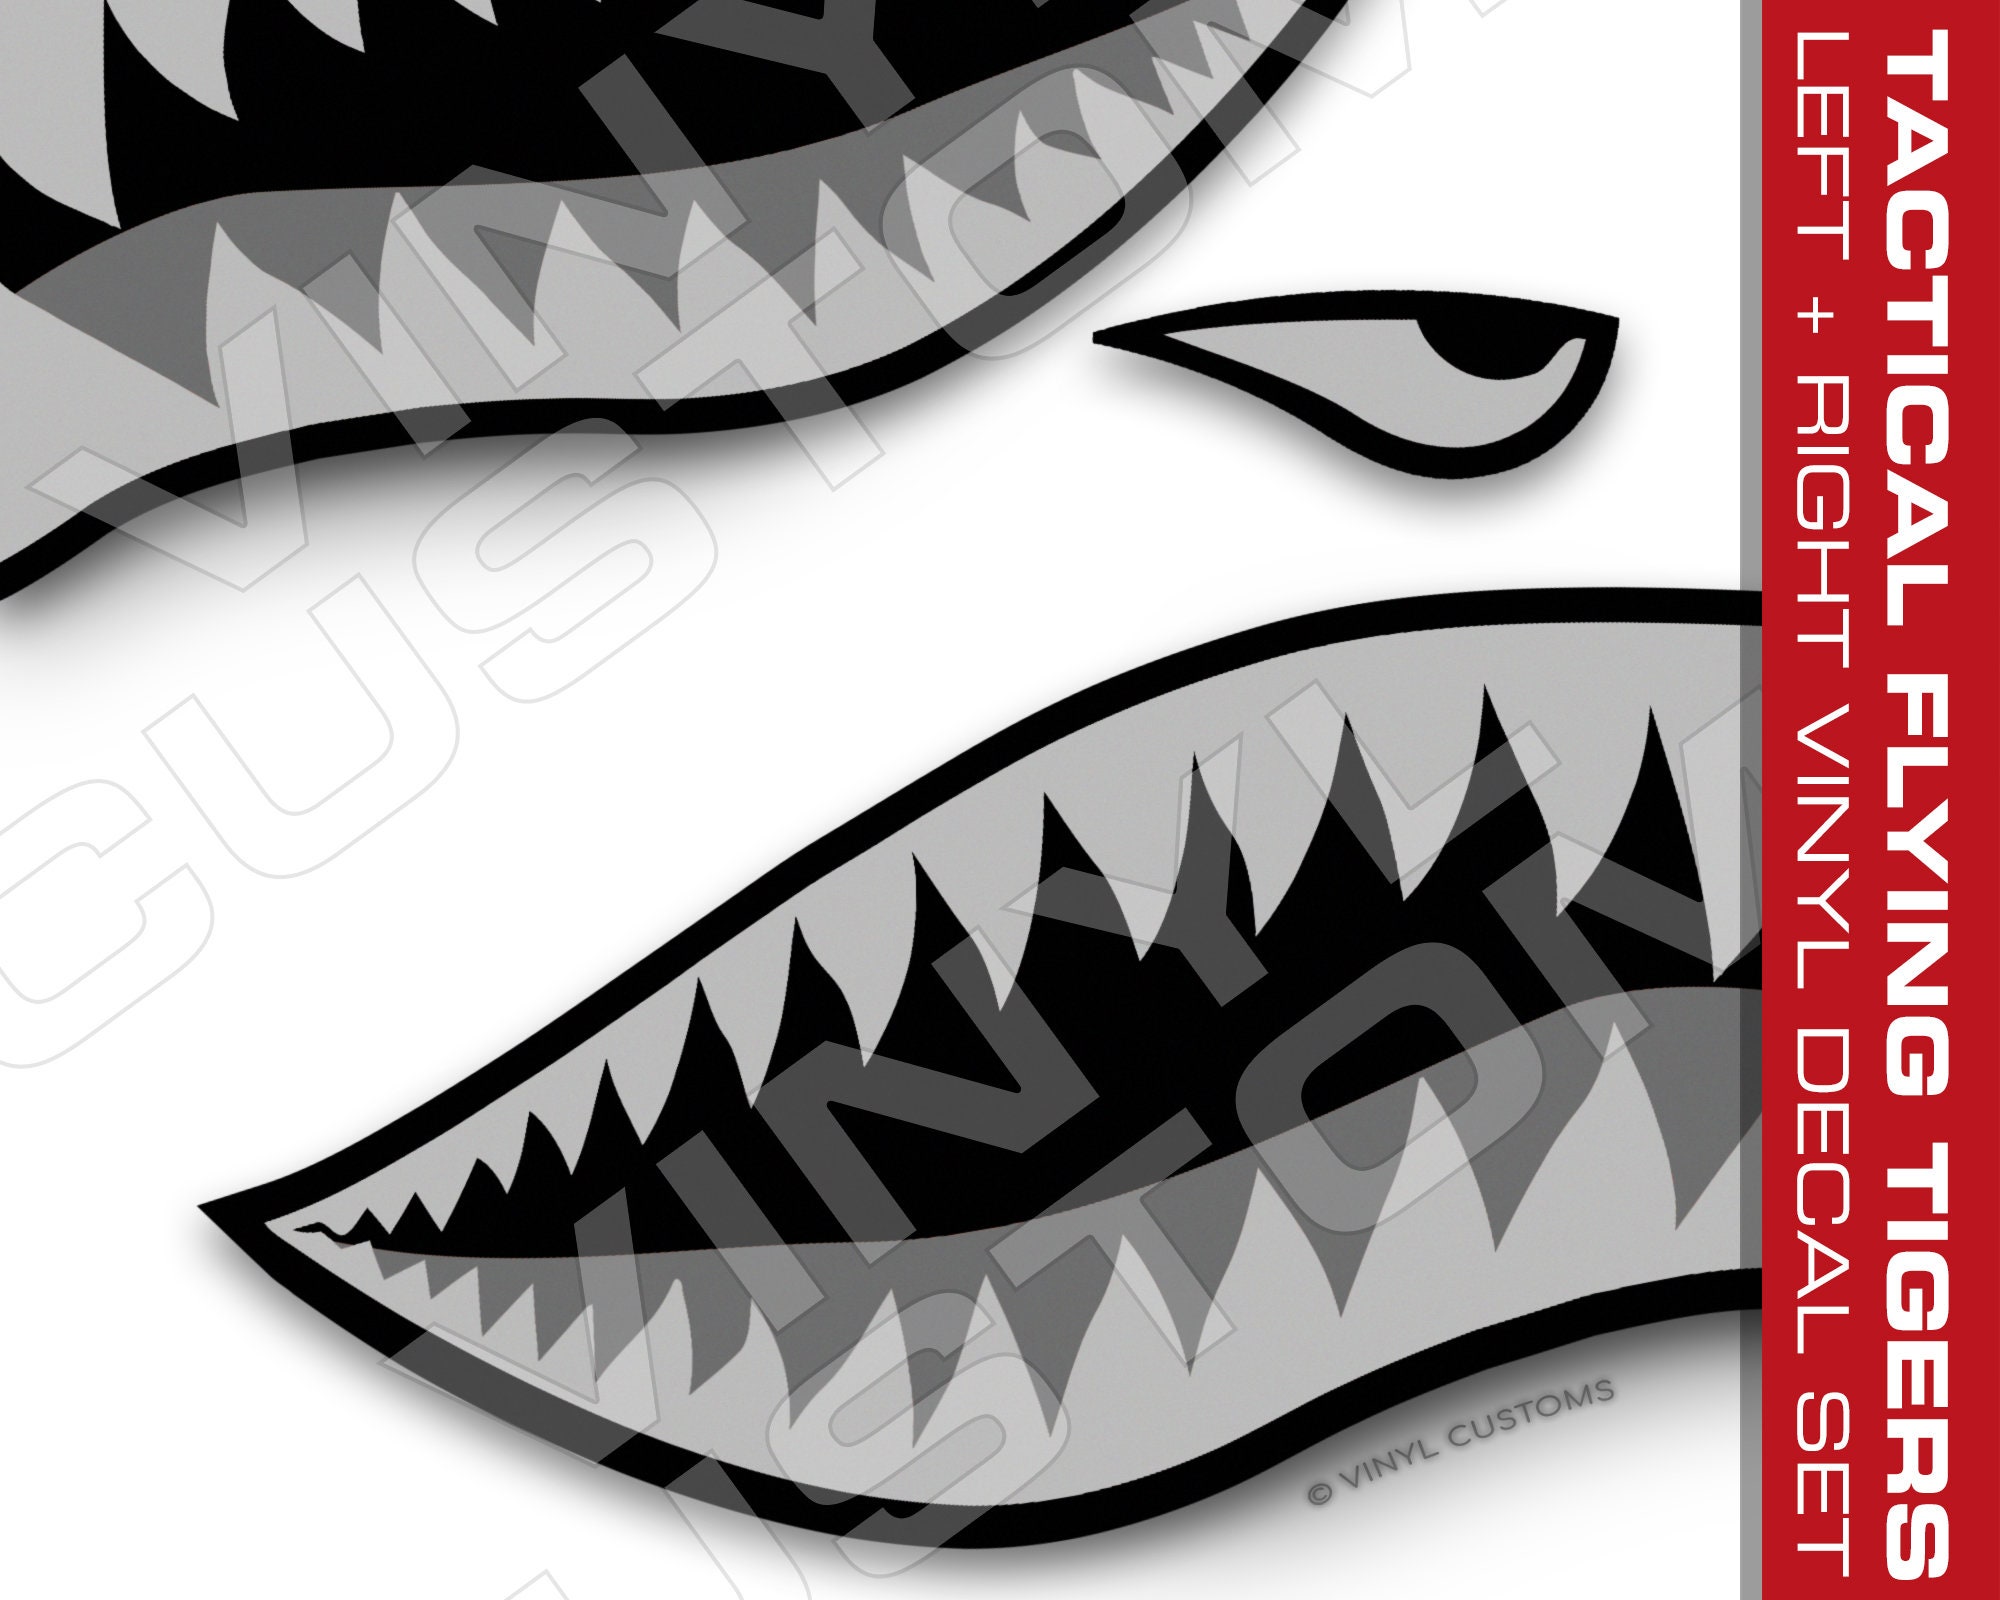 Flying Tigers Vinyl Decal Sticker Tactical - Etsy